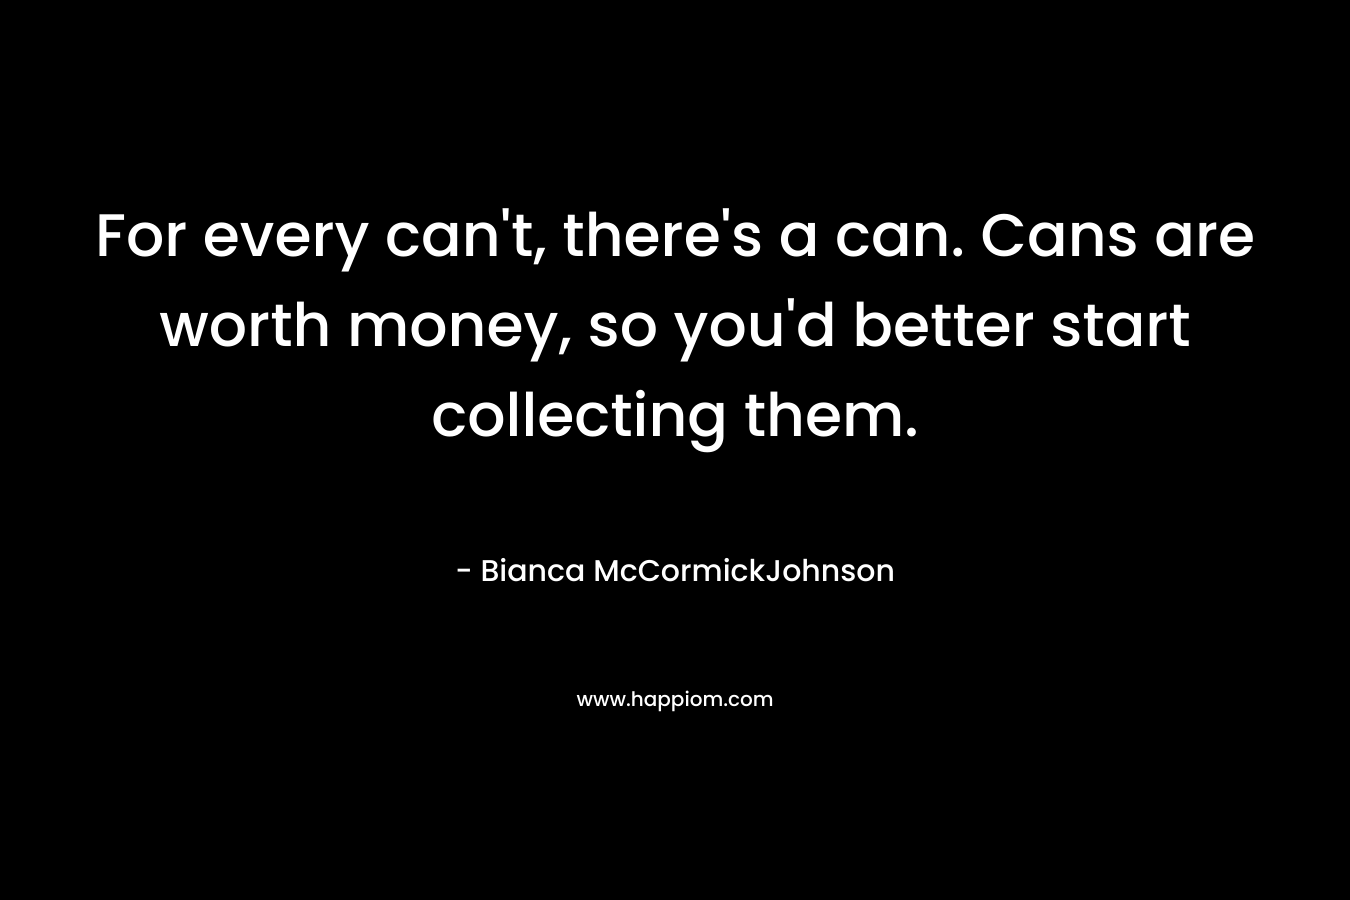 For every can't, there's a can. Cans are worth money, so you'd better start collecting them.